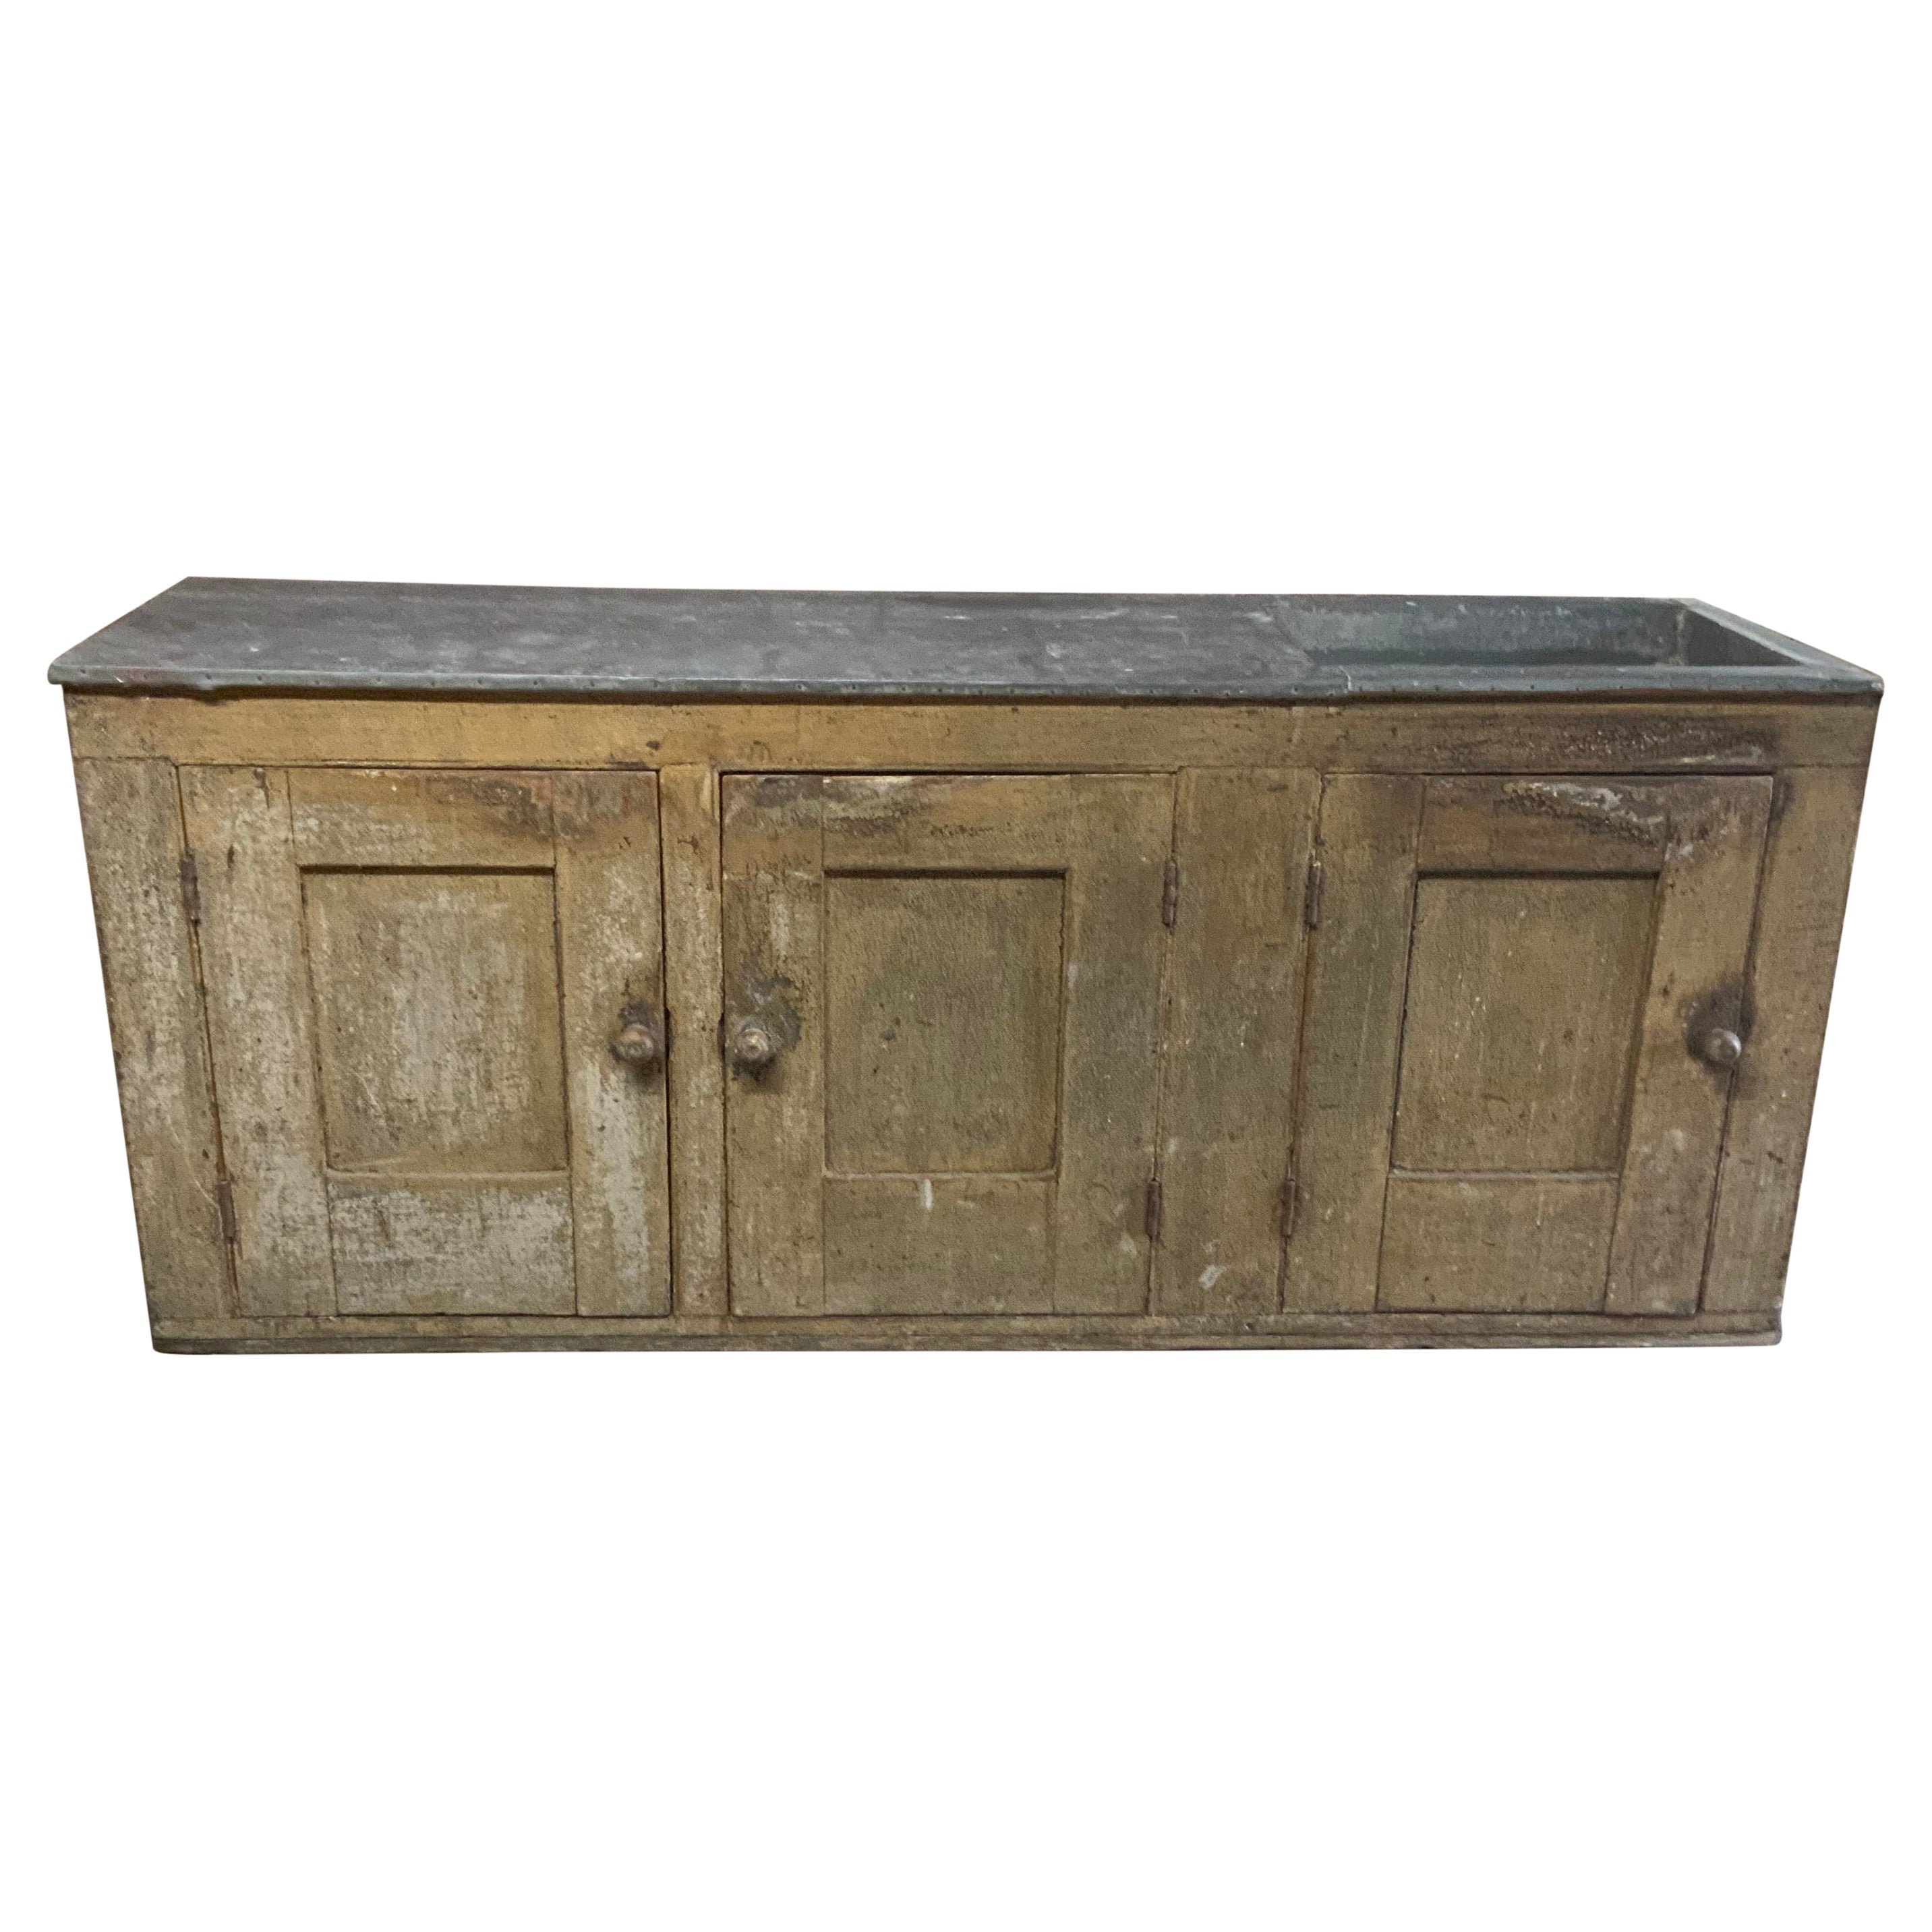 19th Century Country Zinc Top Dry Sink